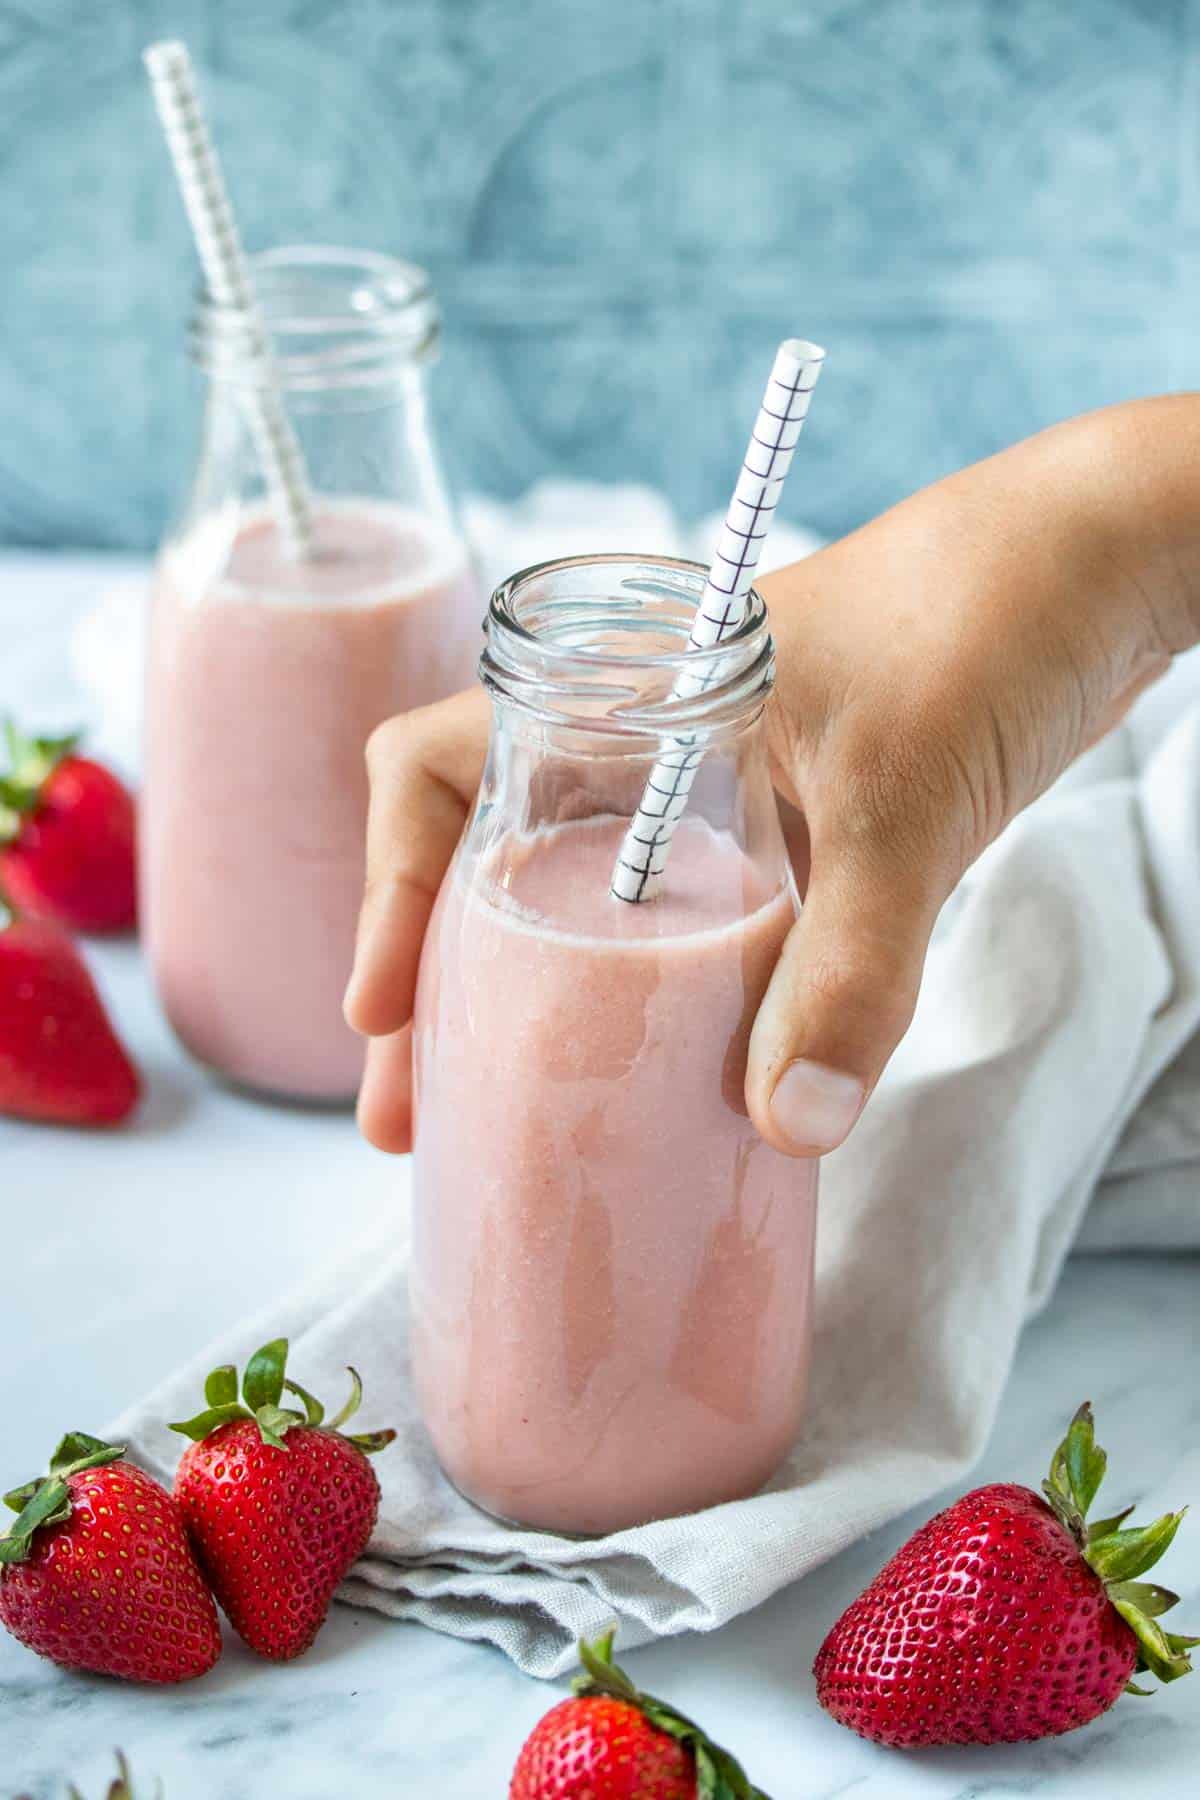 A child's hands holding Homemade vegan strawberry milk syrup in a glass bottle